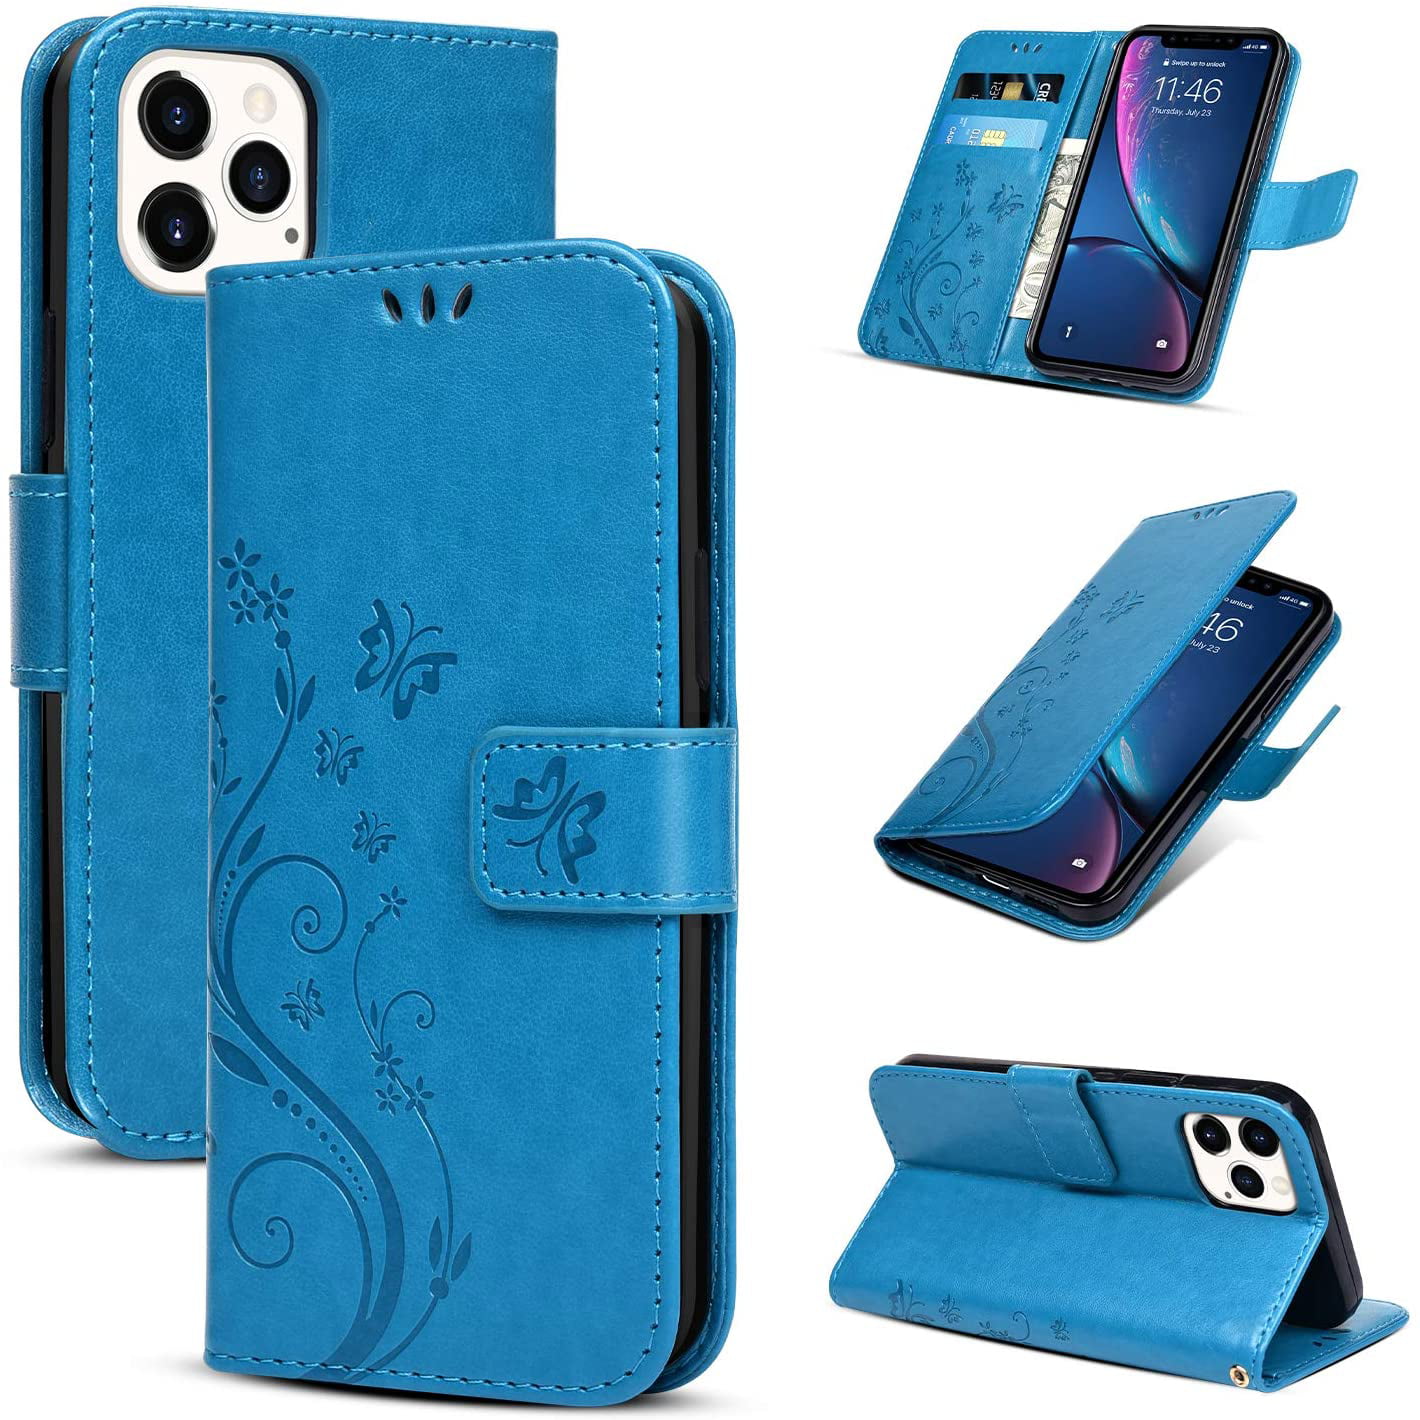 Iphone 12 Cover Mobile Phone Cover Flip Case Card Slot Leather Cover Bag Card Slot Magnetic